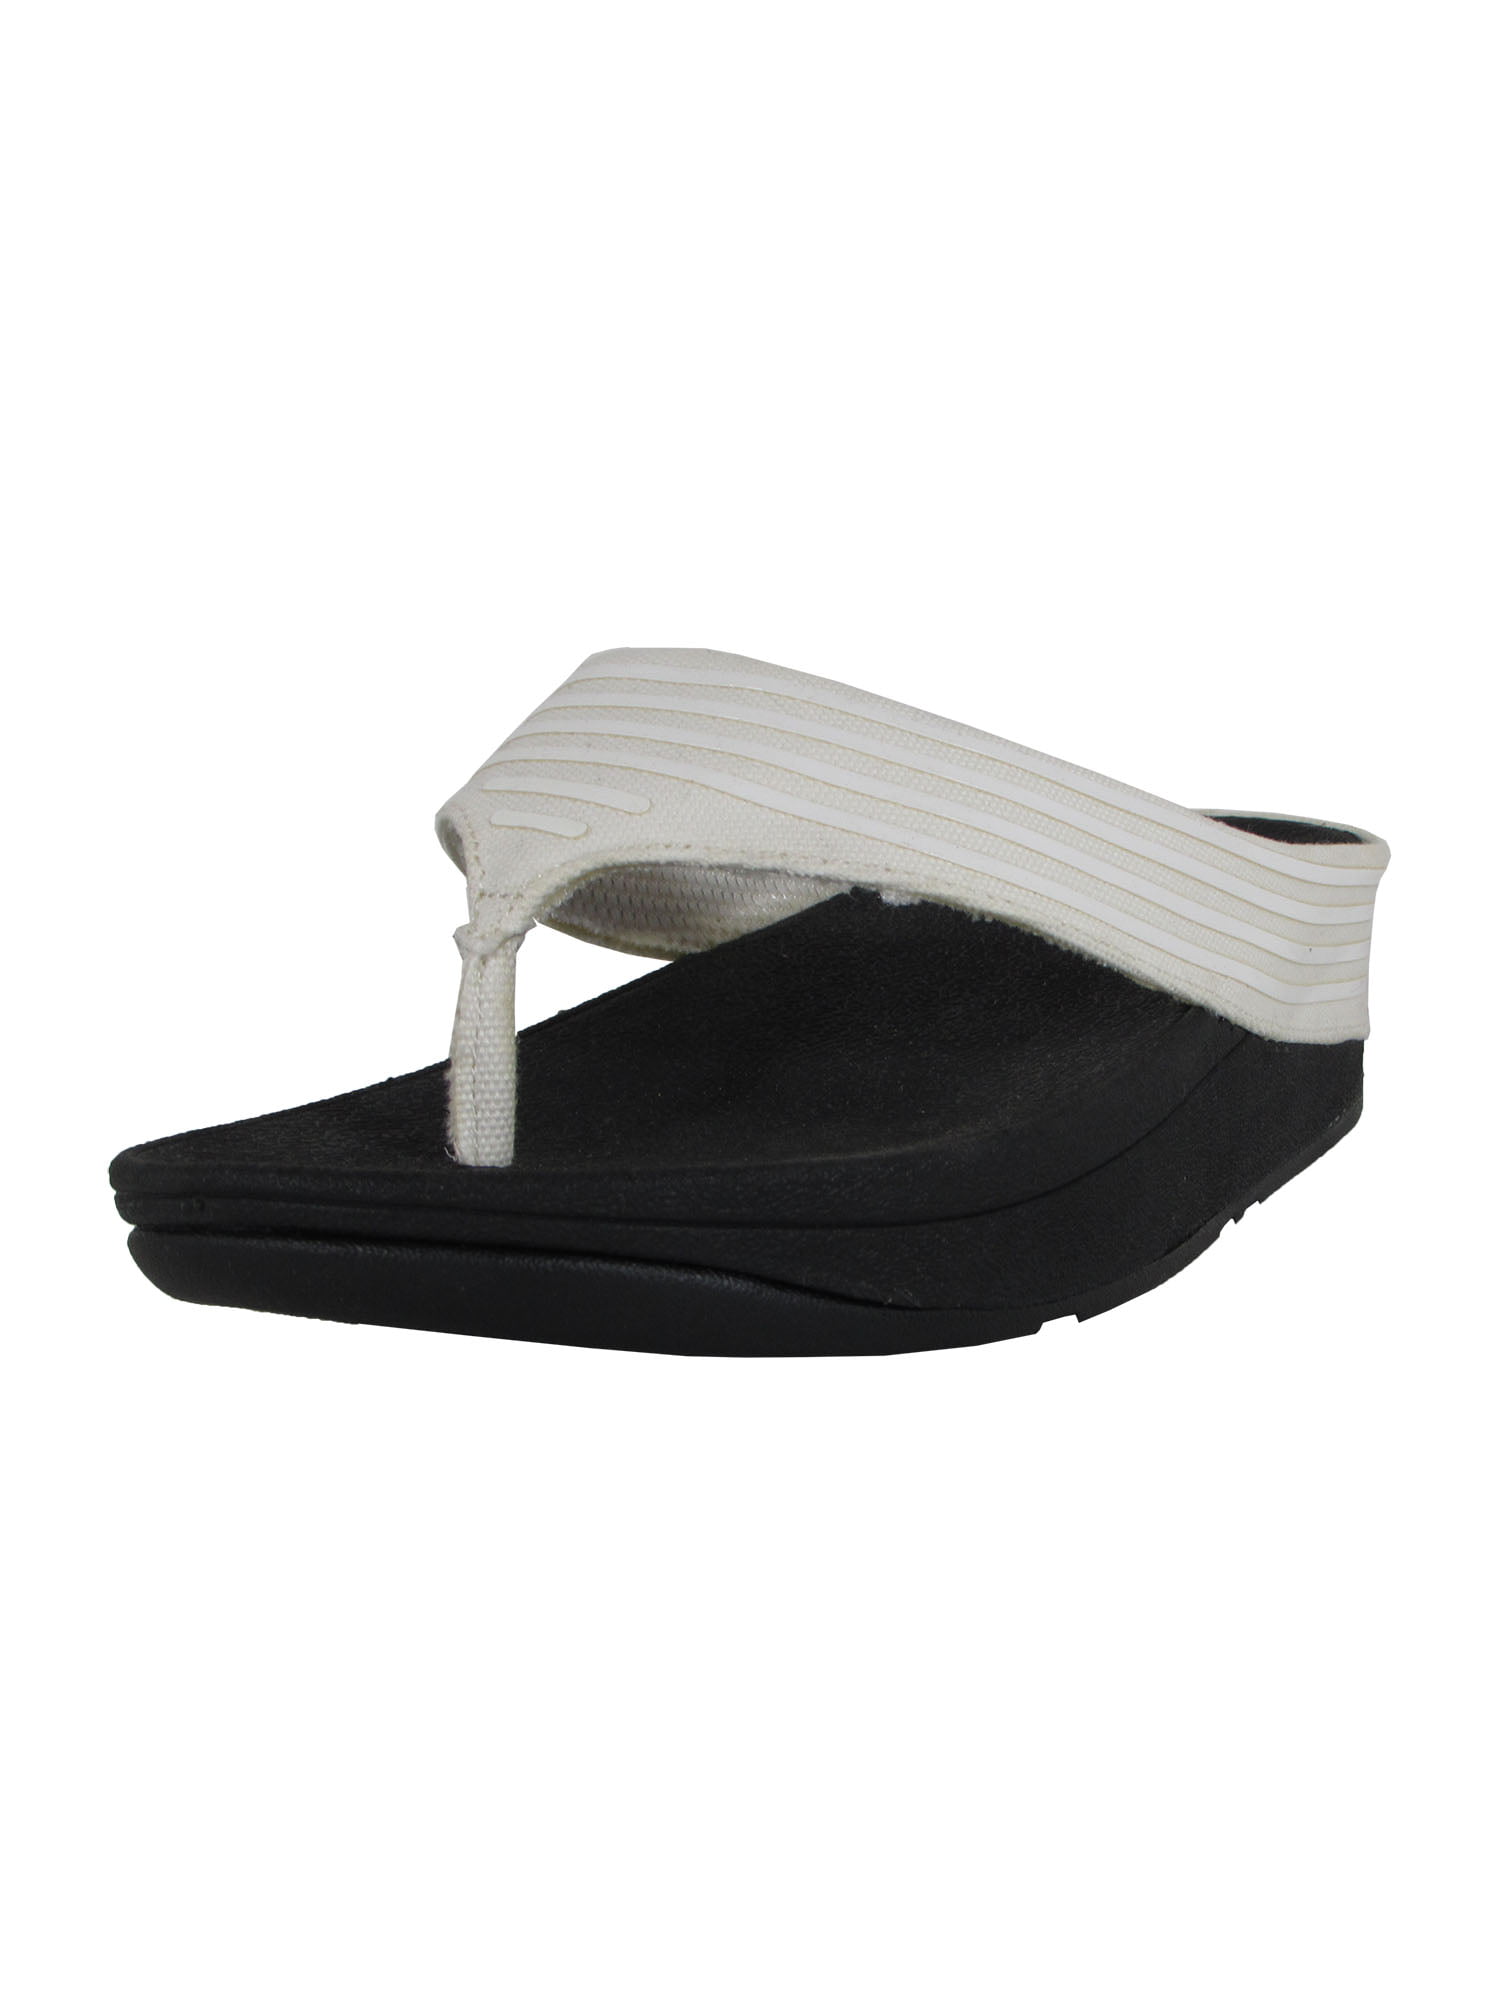 fitflop ringer toe post